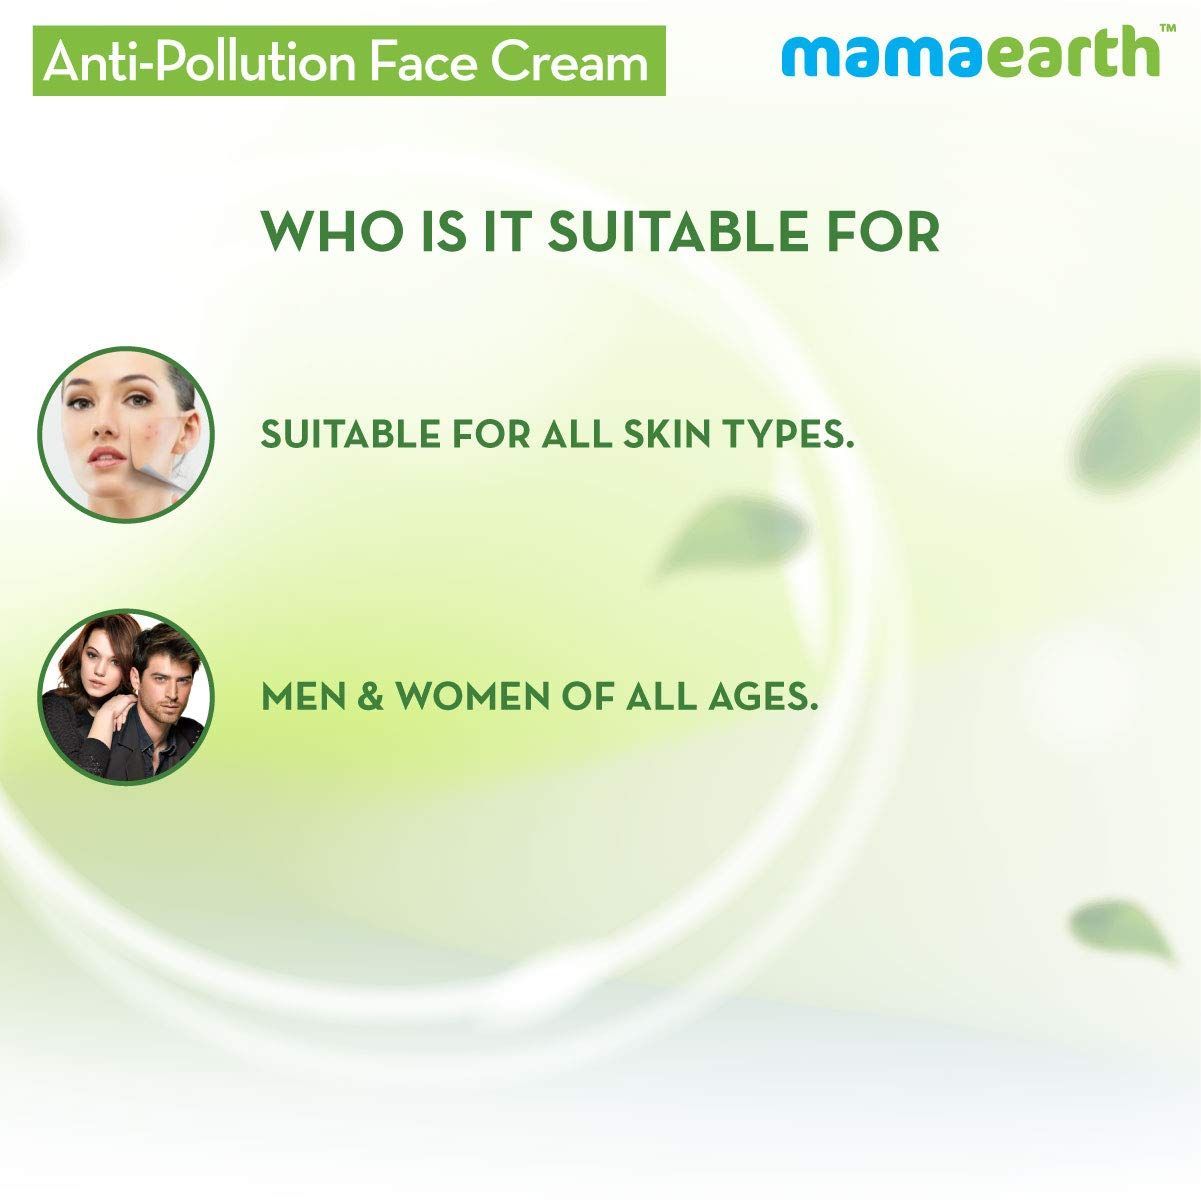 Anti-Pollution Daily Face Cream, for Dry and Oily Skin, with Turmeric and Pollustop For a Bright Glowing Skin - 80ml